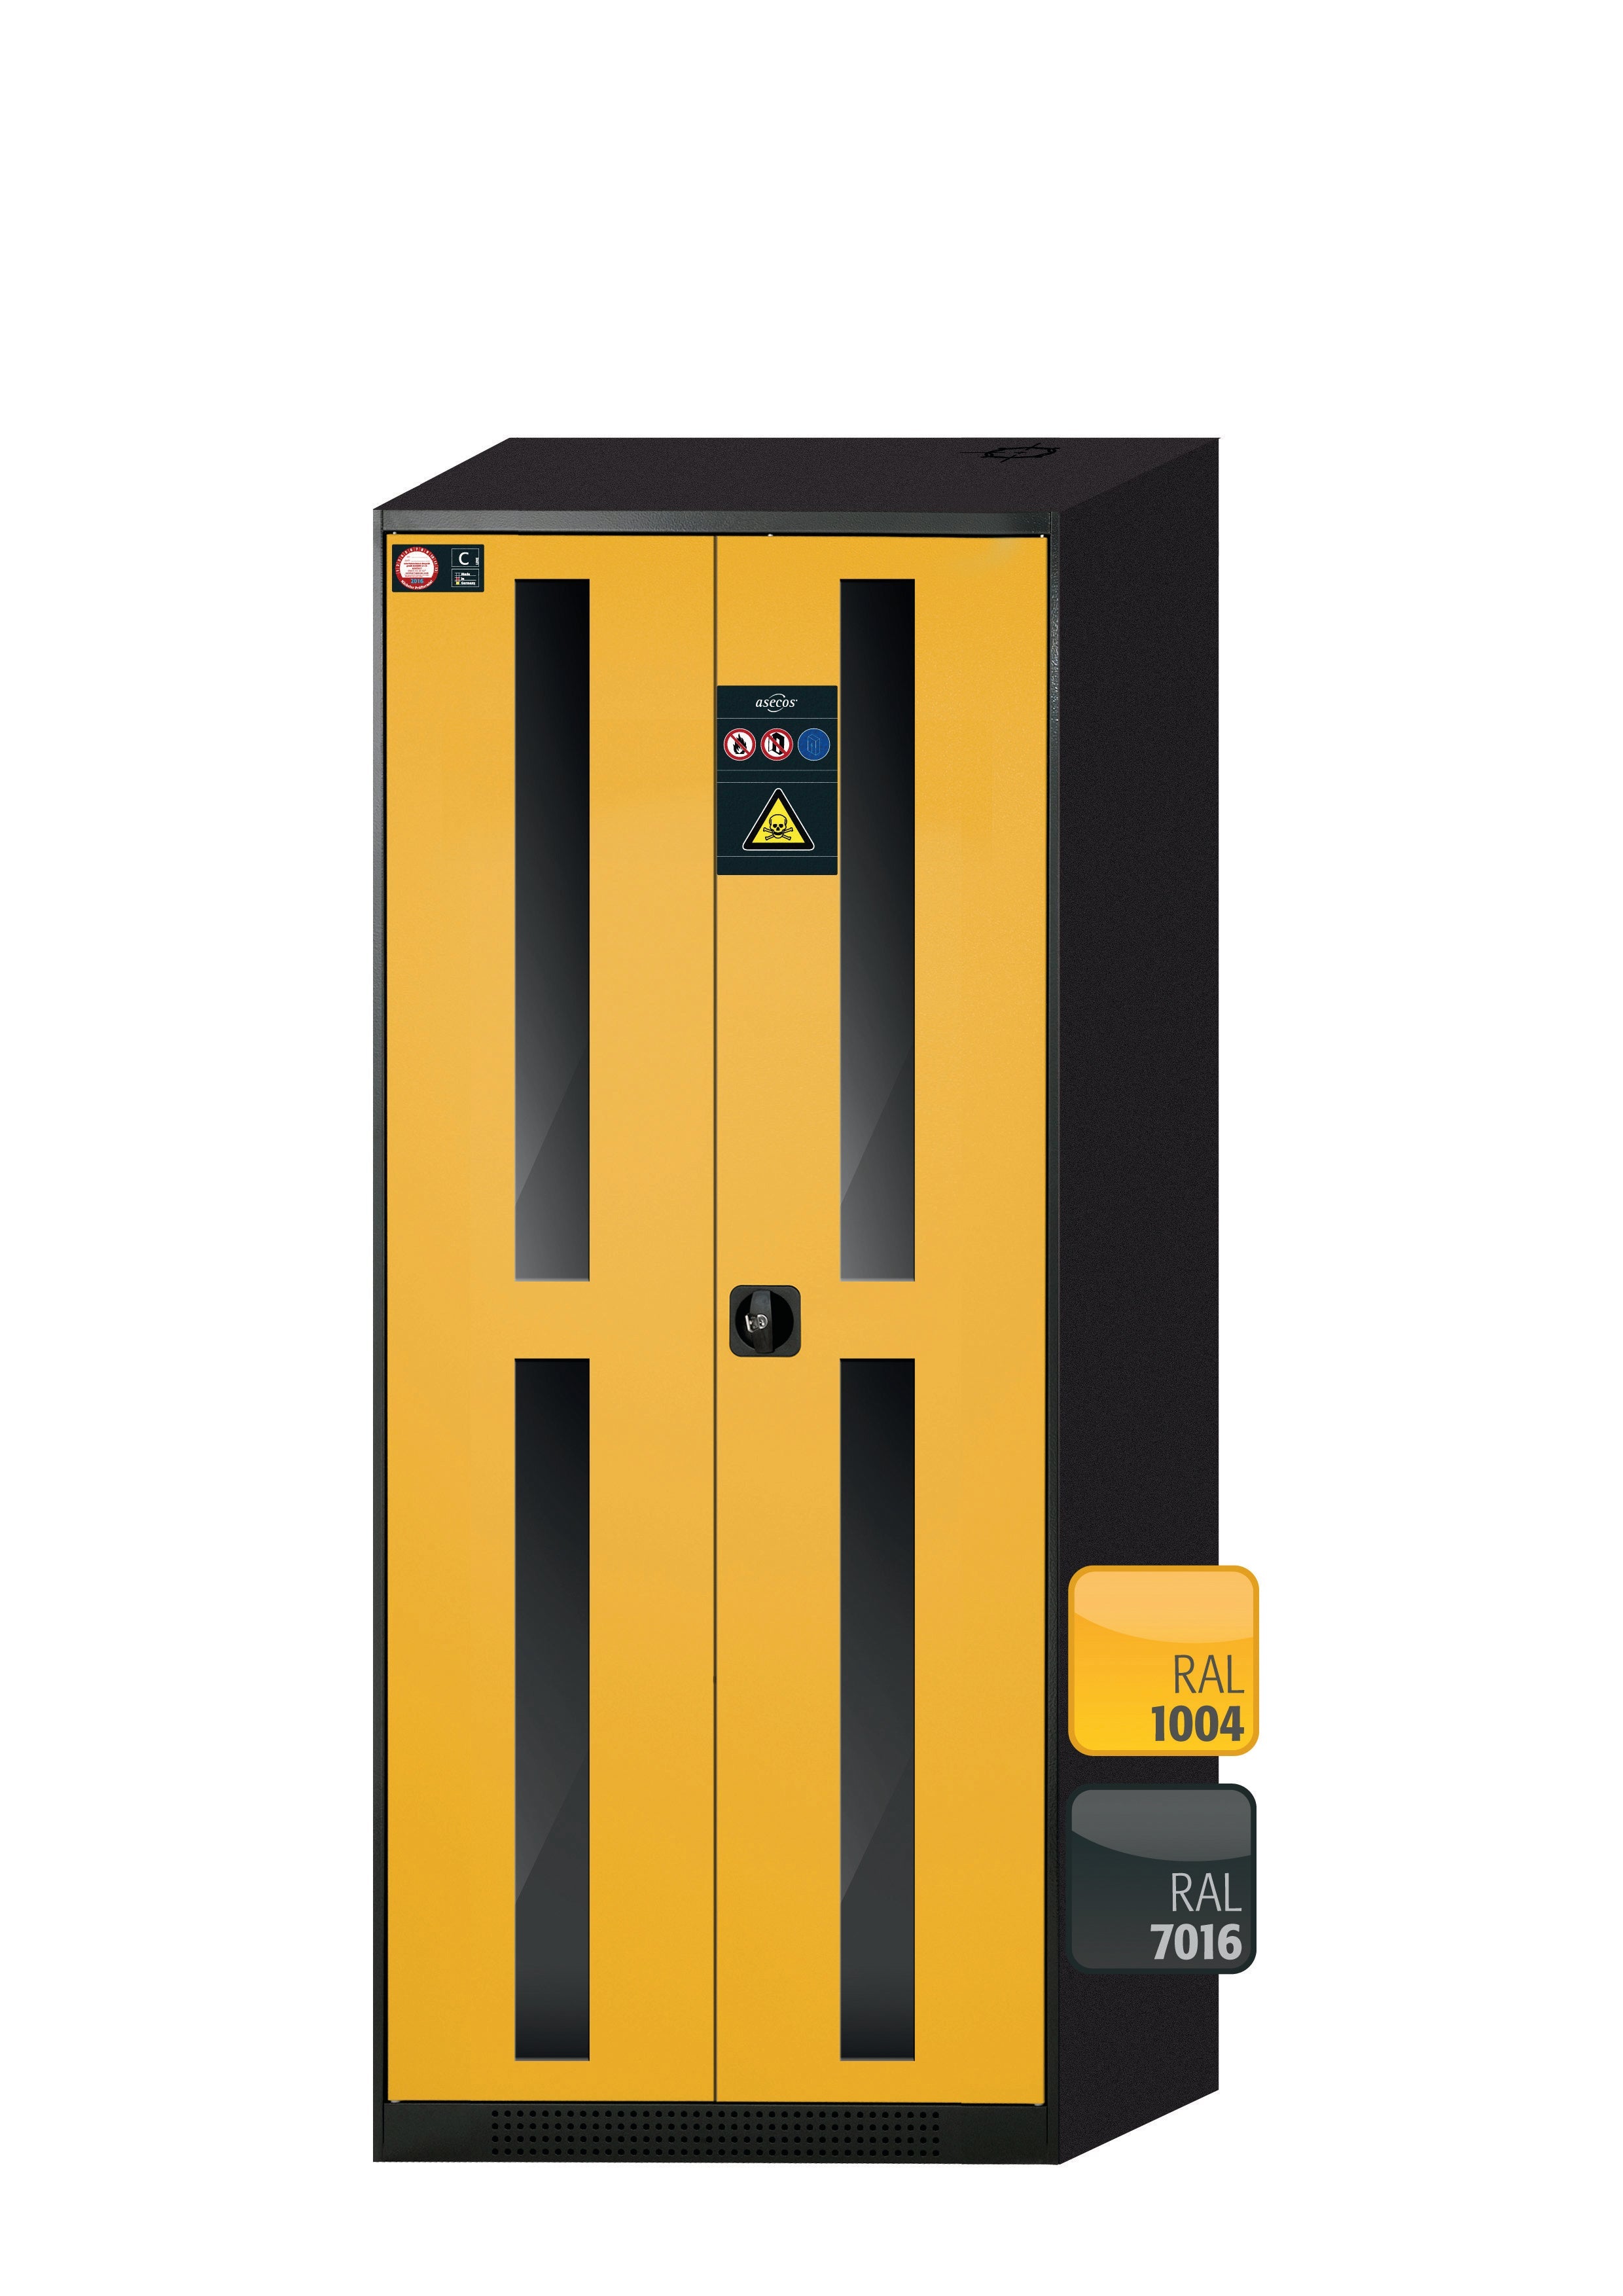 Chemical cabinet CS-CLASSIC-G model CS.195.081.WDFW in safety yellow RAL 1004 with 5x AbZ shelf pull-outs (sheet steel/polypropylene)